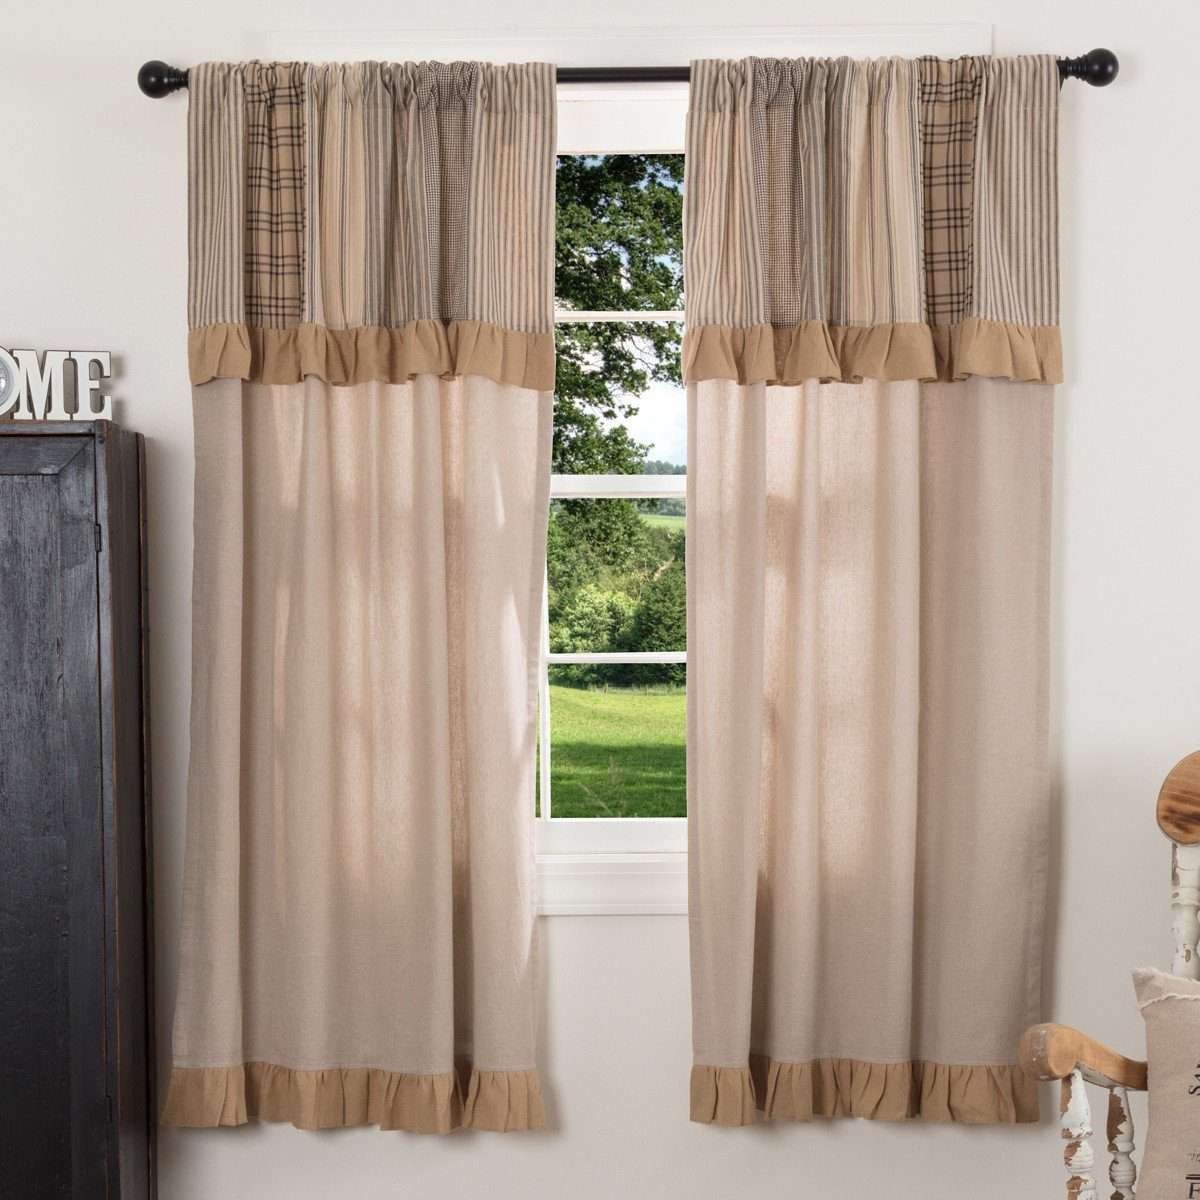 Sawyer Mill Charcoal Short Panel Curtain with Attached Patchwork Valance Set of 2 36"x63" - The Fox Decor